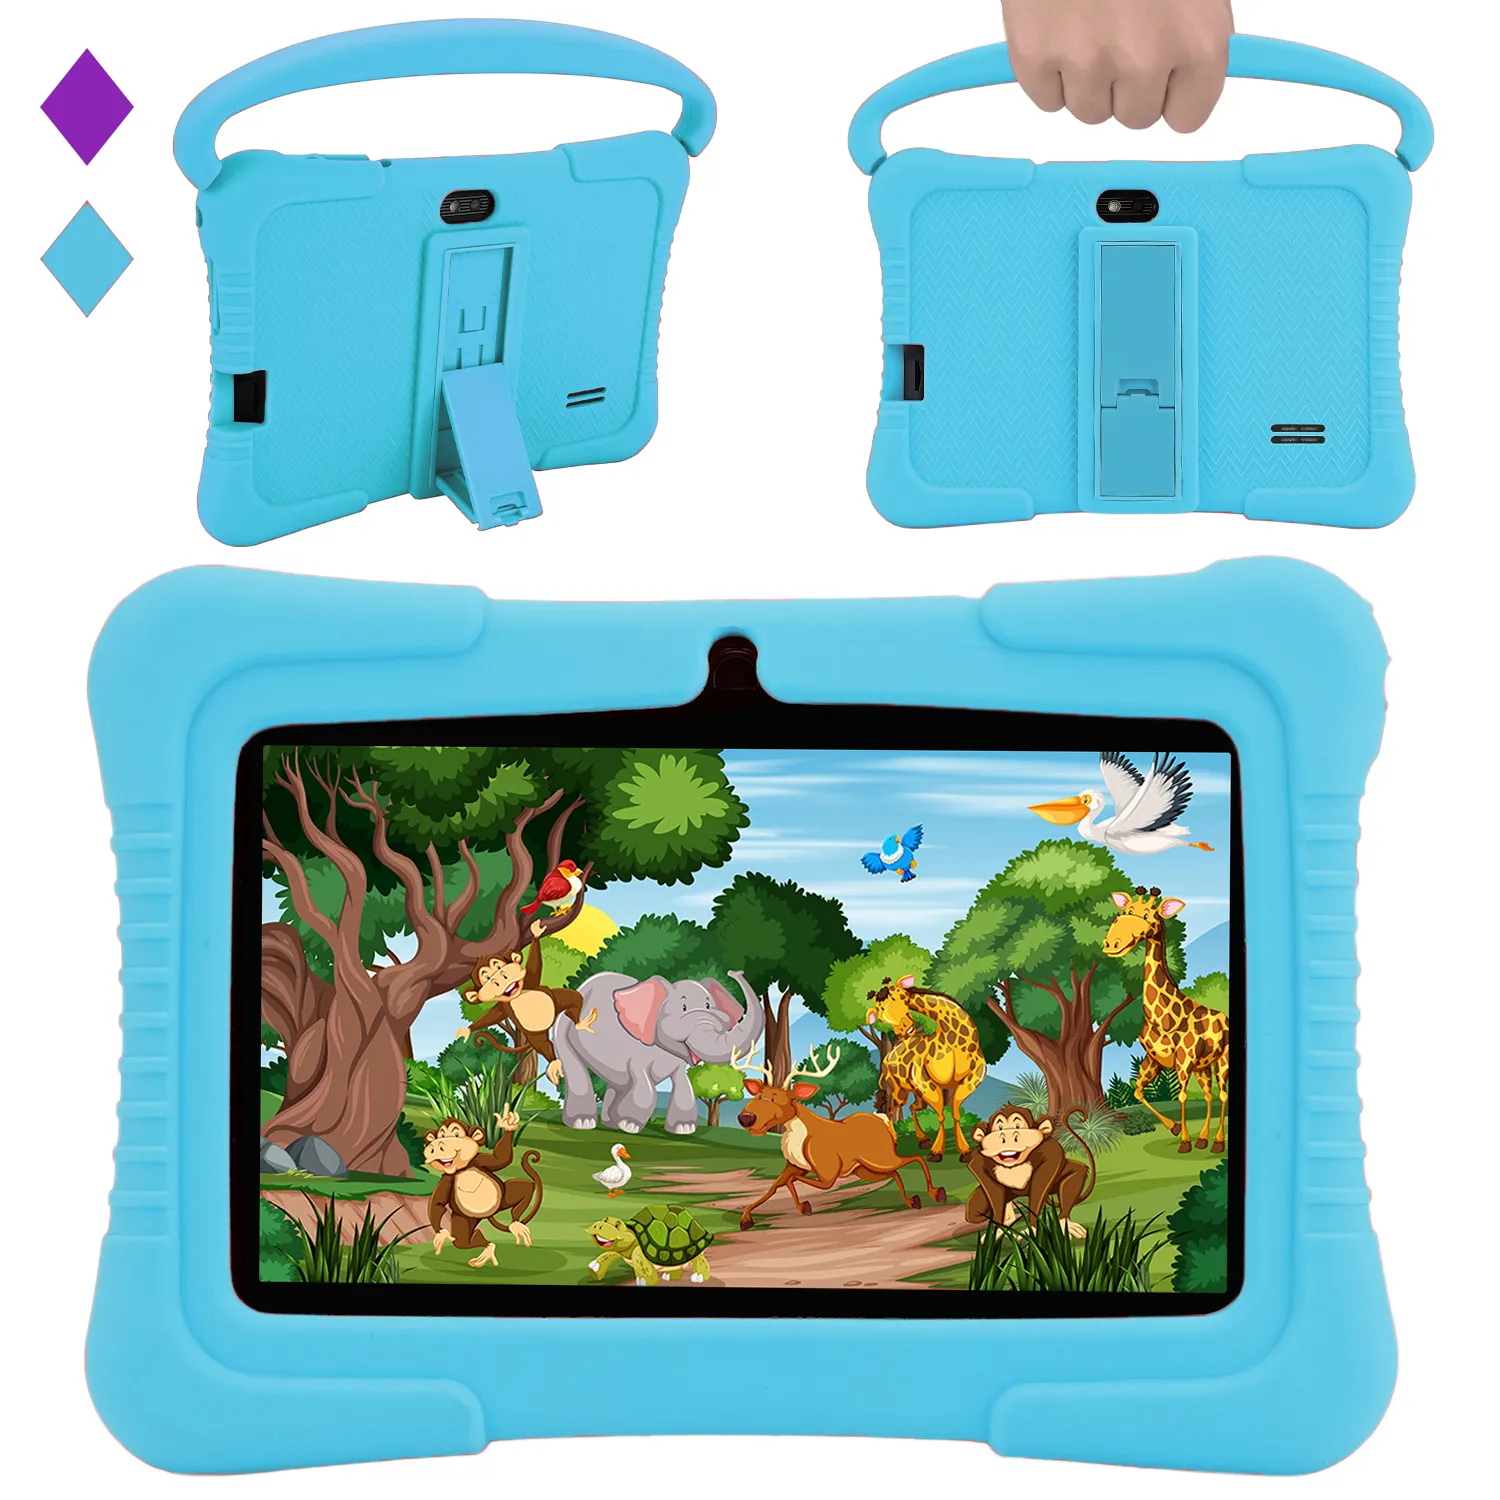 Veidoo 7 inch Tablet for Kids Learning Gaming Educational Kids Tablet with Silicone Case 2GB RAM 32GB ROM WiFi Android Tablet Pc